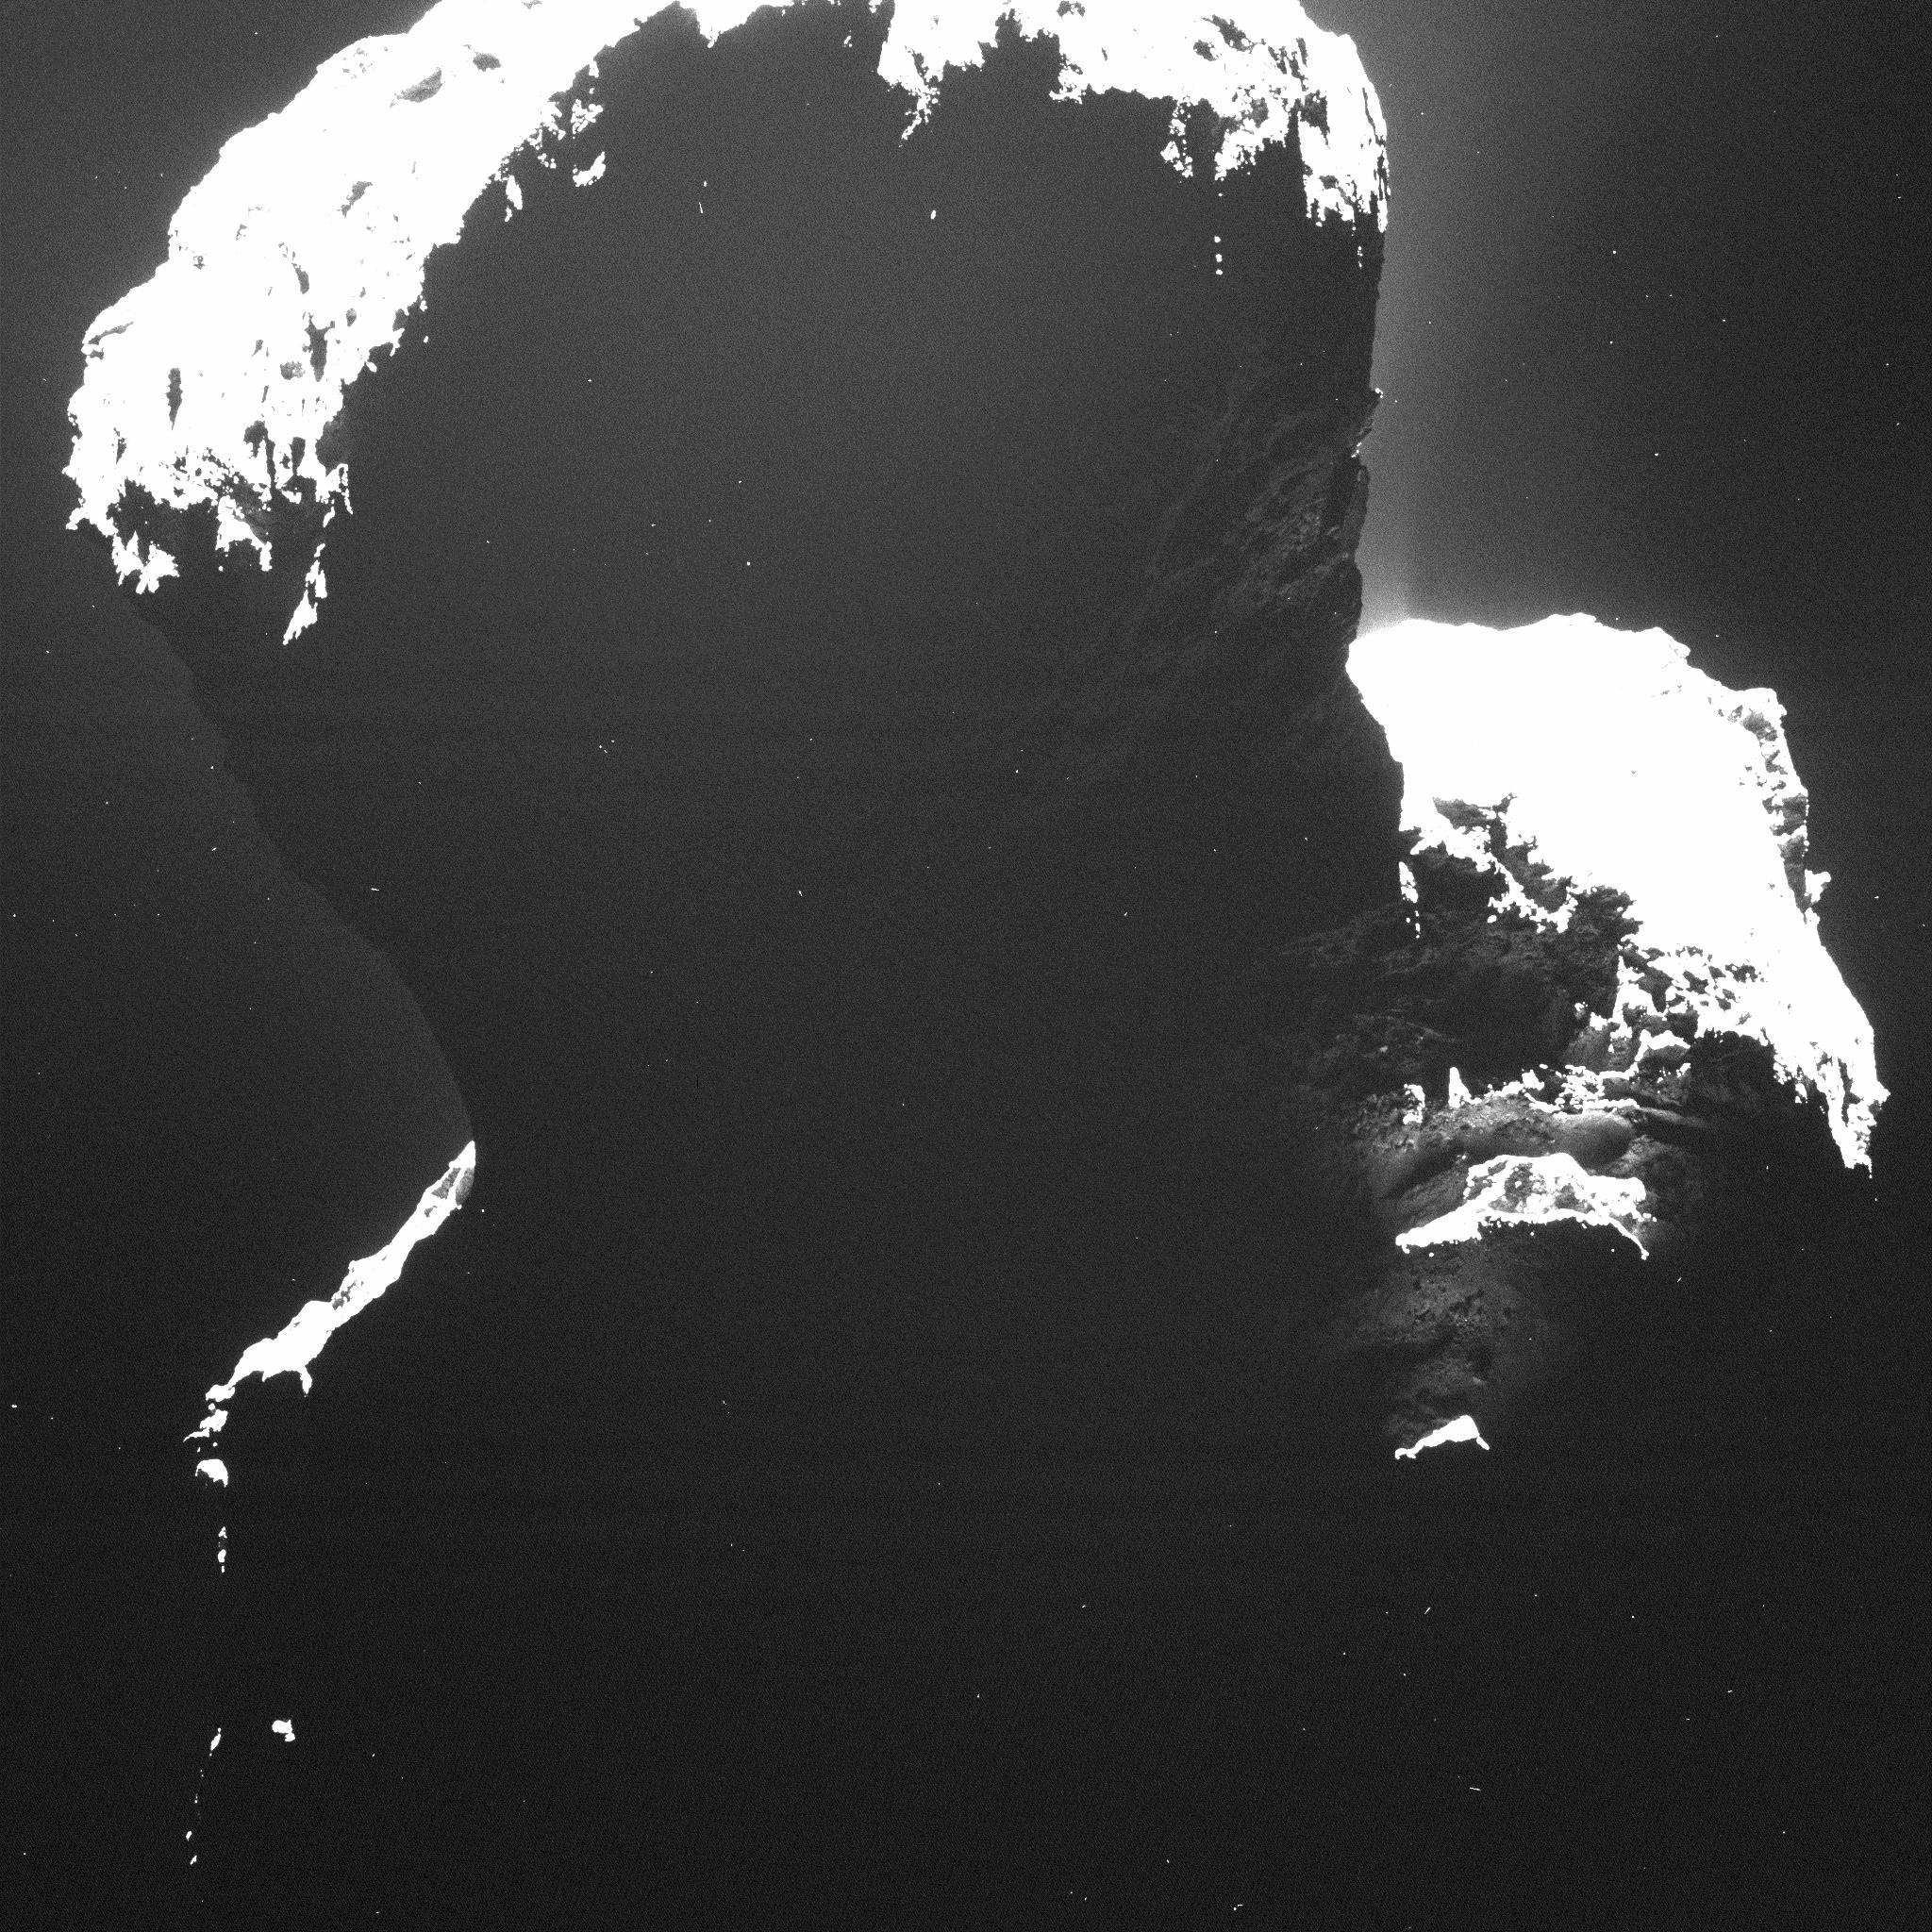 Here’s Our First Glimpse Of The Rosetta Comet’s Dark Side